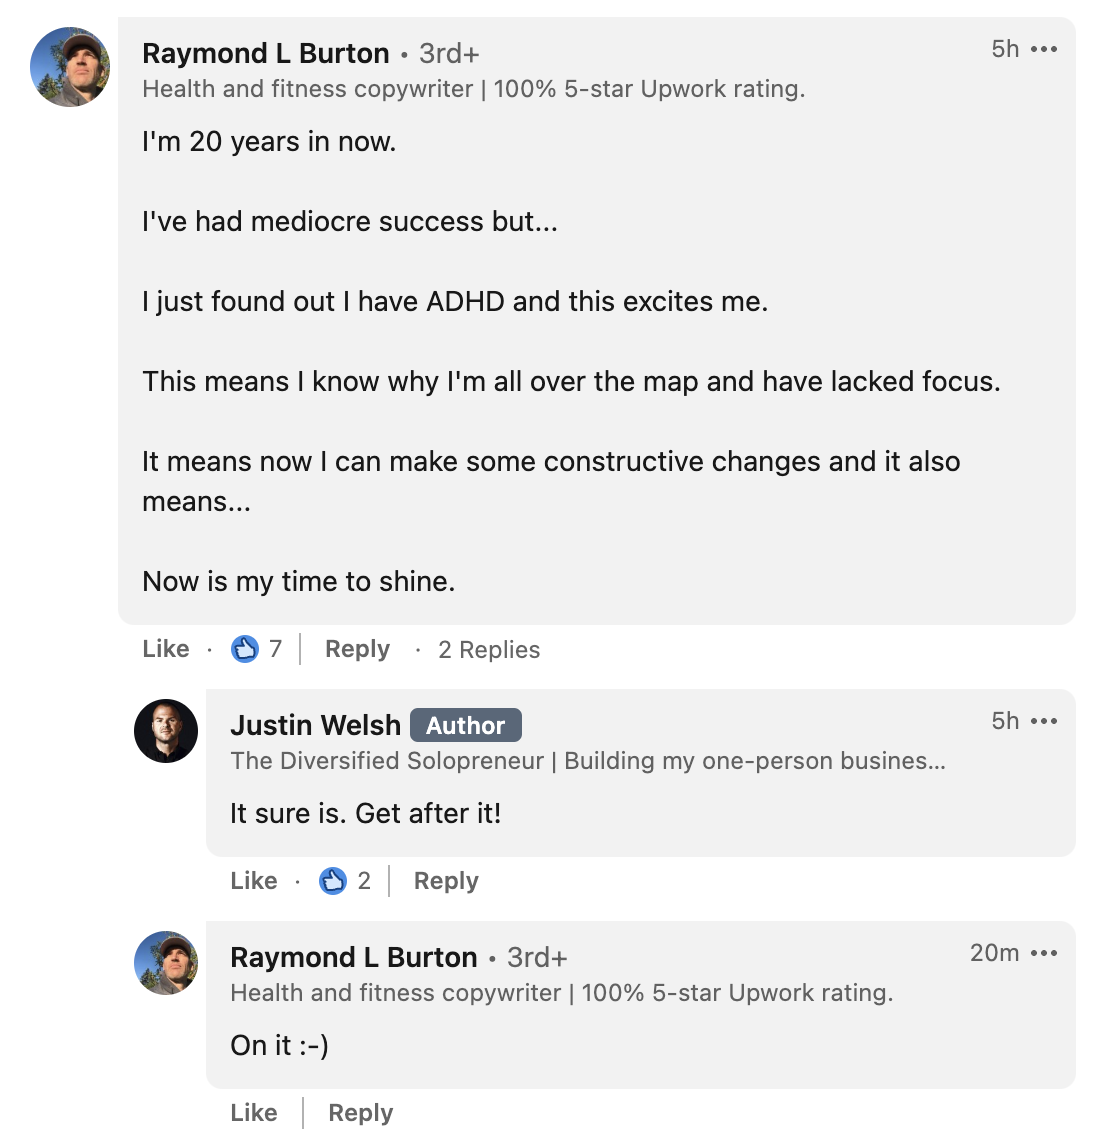 Justin Welsh's response to a comment on LinkedIn